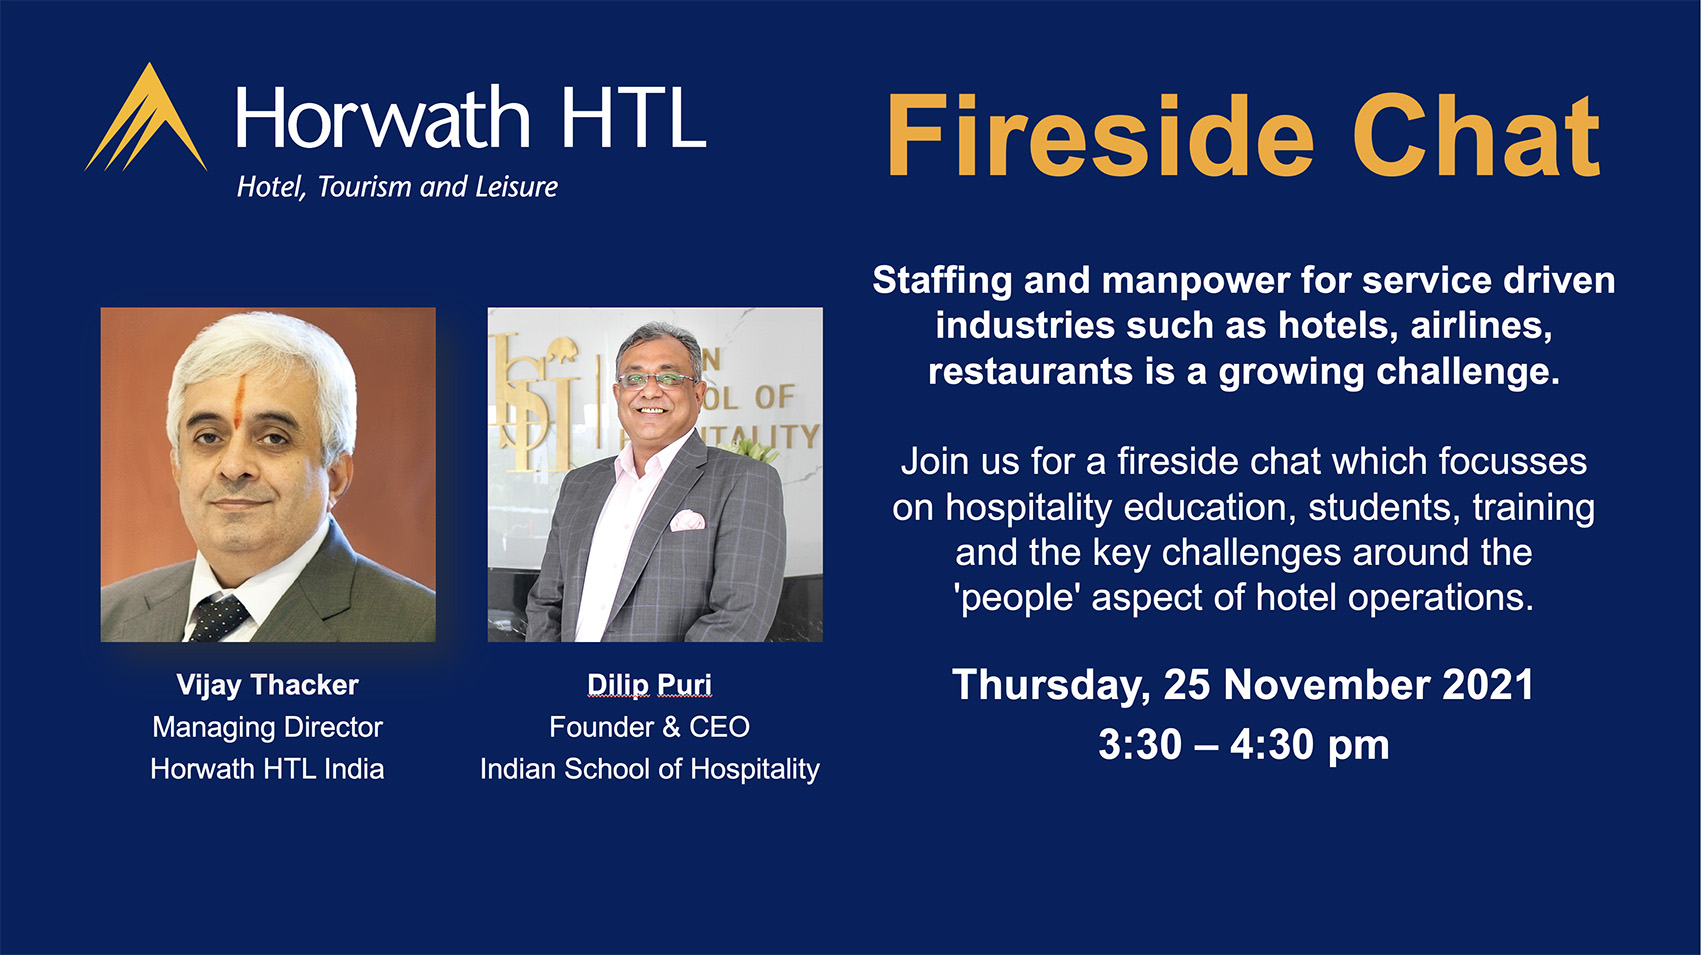 Fireside Chat with Dilip Puri, Founder & CEO, Indian School of Hospitality